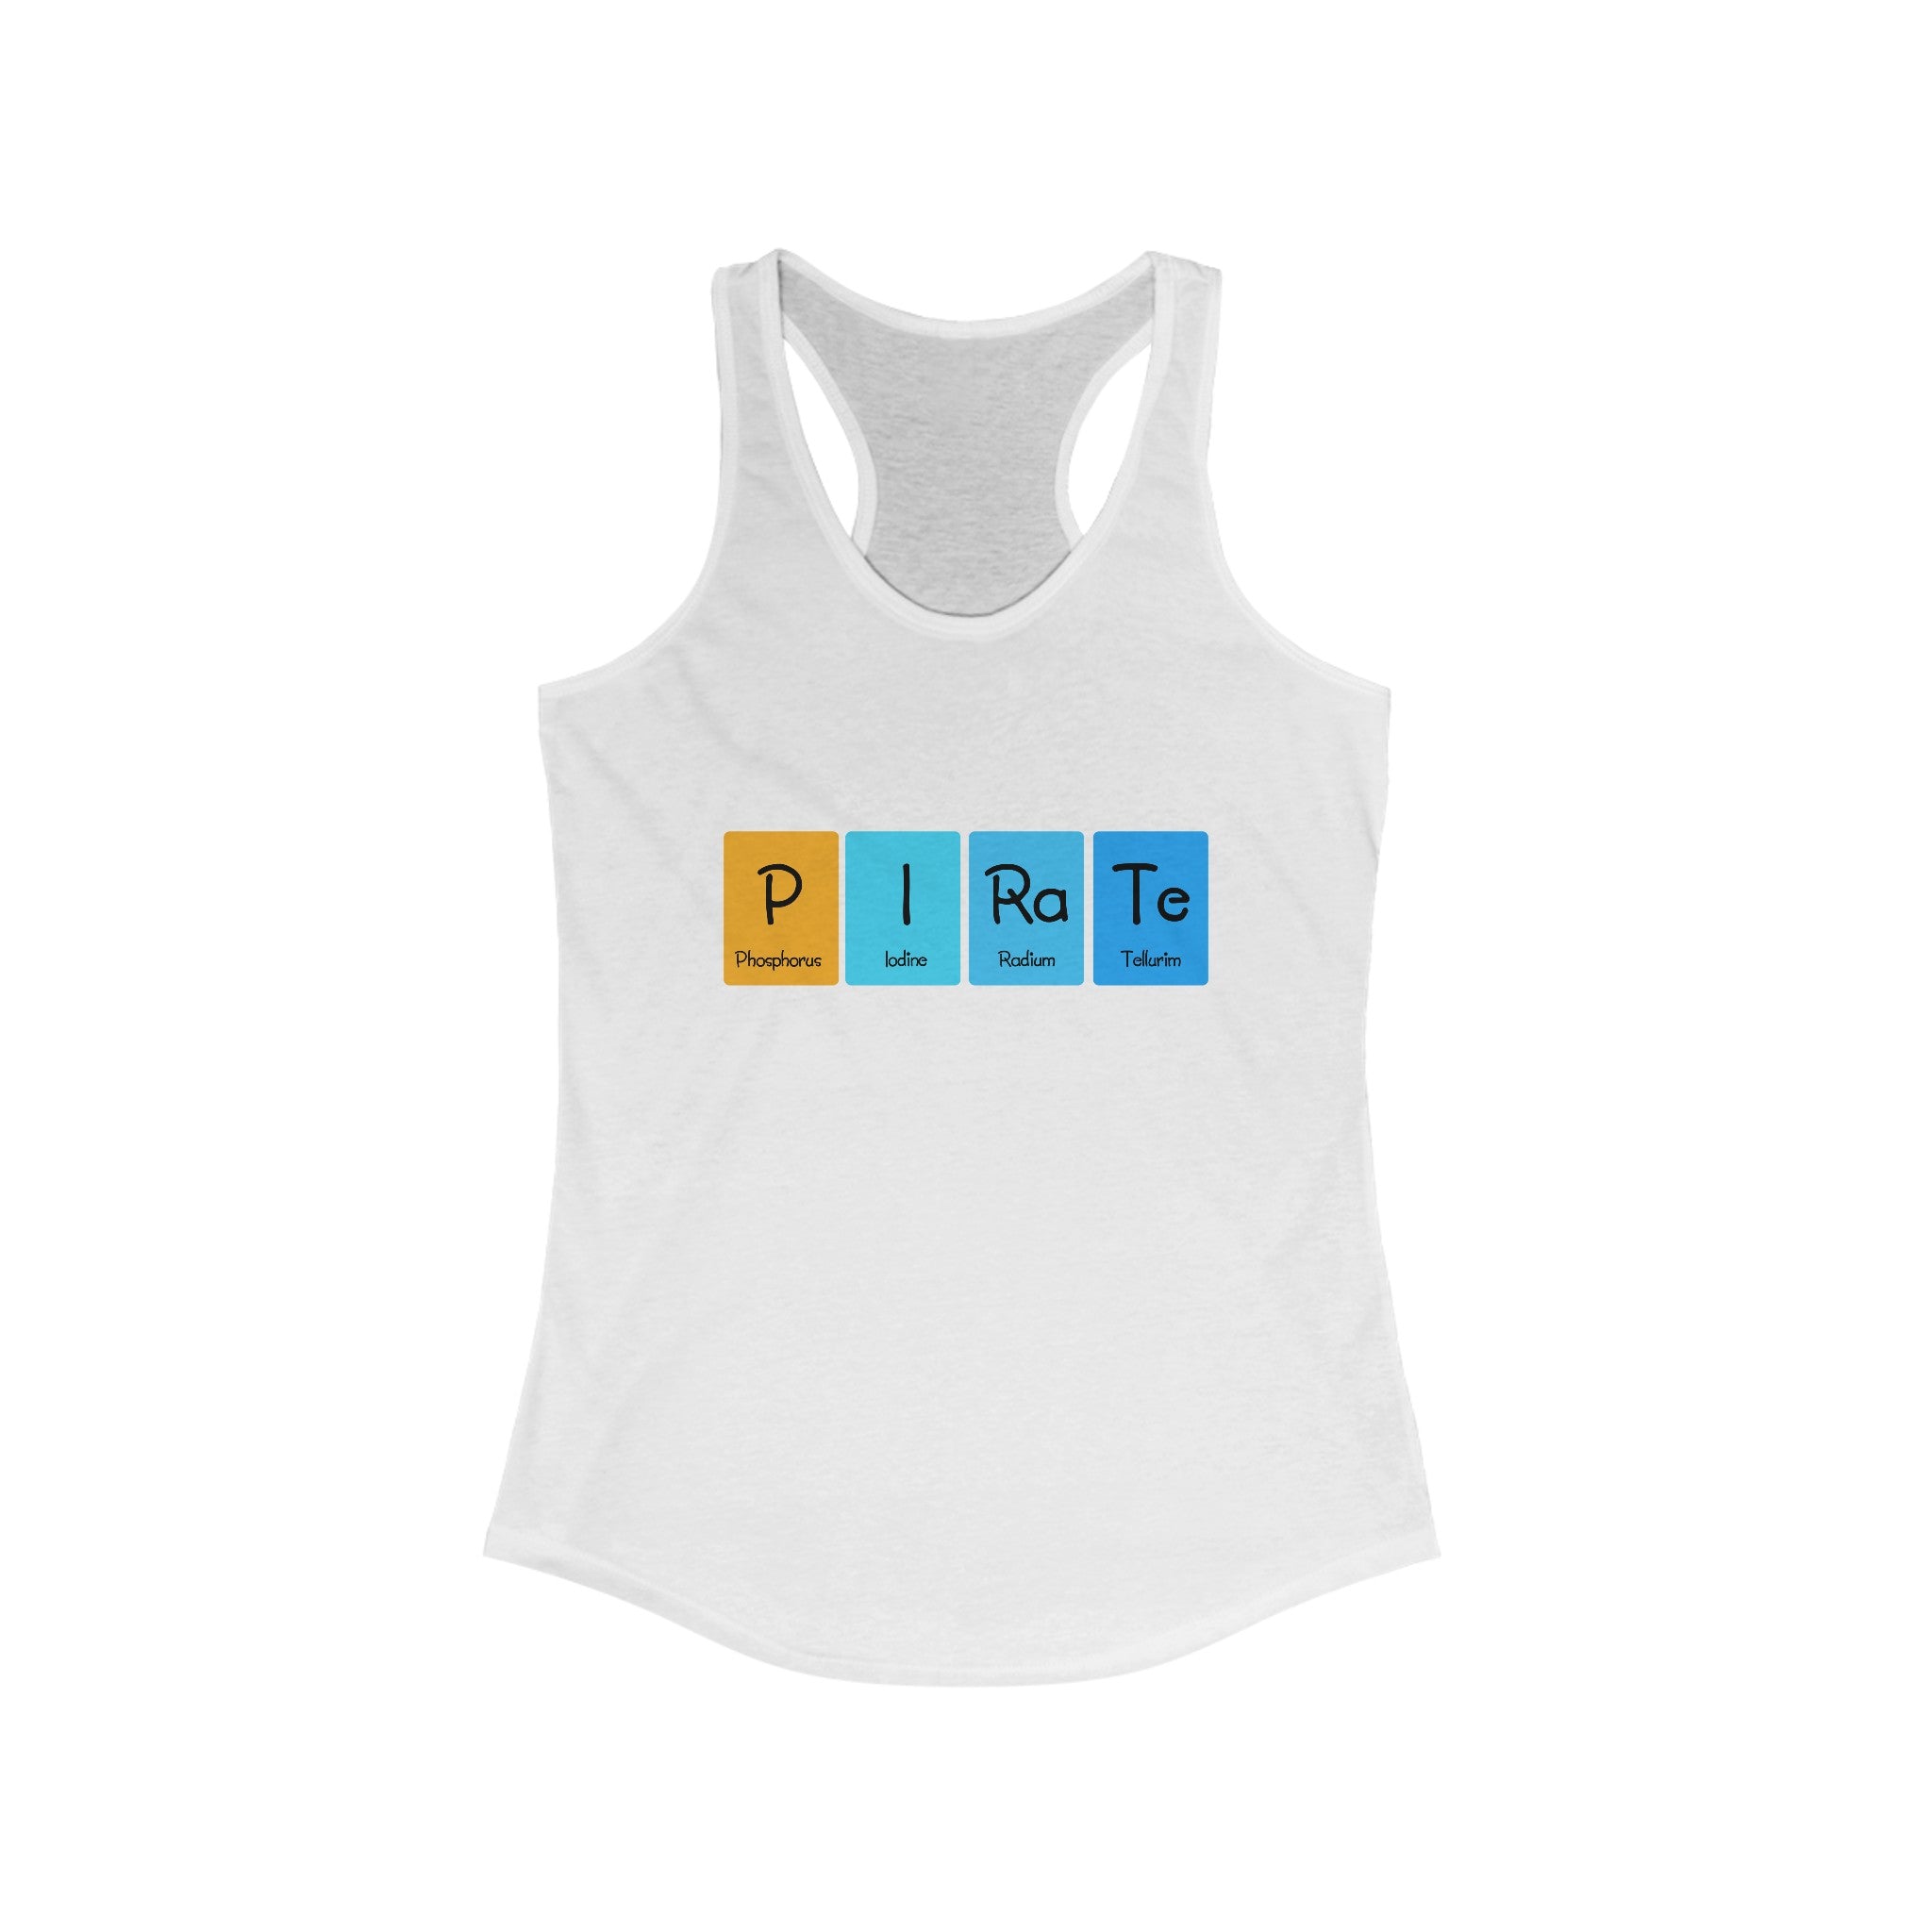 P-I-Ra-Te - Women's Racerback Tank featuring the word "Pirate" spelled out with elements from the periodic table: Phosphorus (P), Iodine (I), Radium (Ra), and Tellurium (Te). Perfect for an active lifestyle, this lightweight tank is both stylish and comfortable.